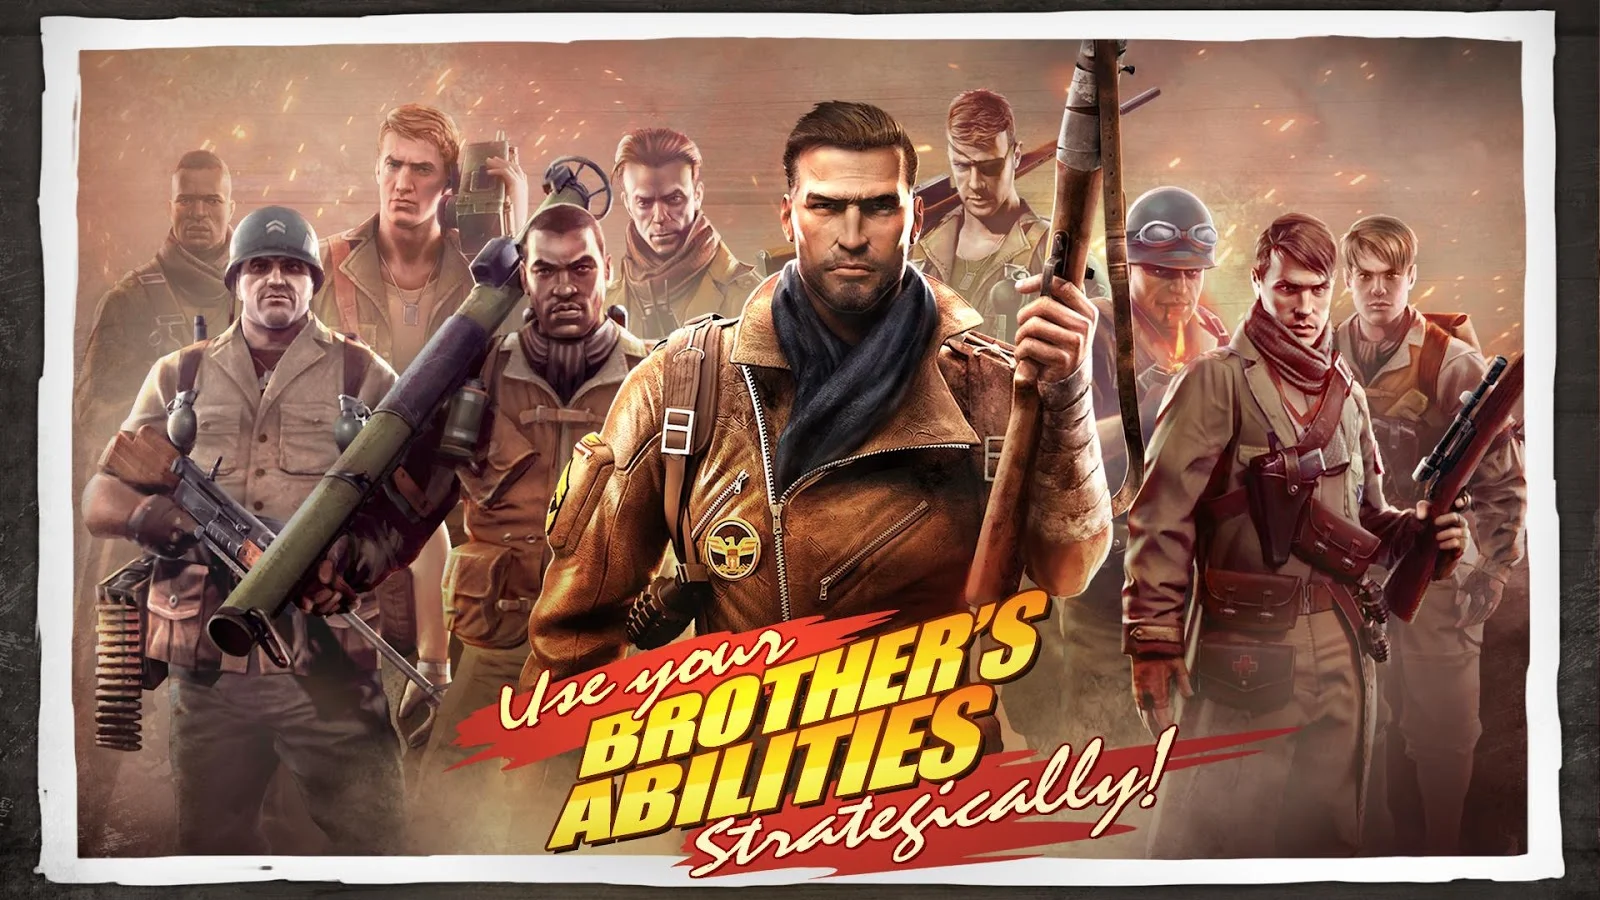   Brothers in Arms® 3- screenshot 